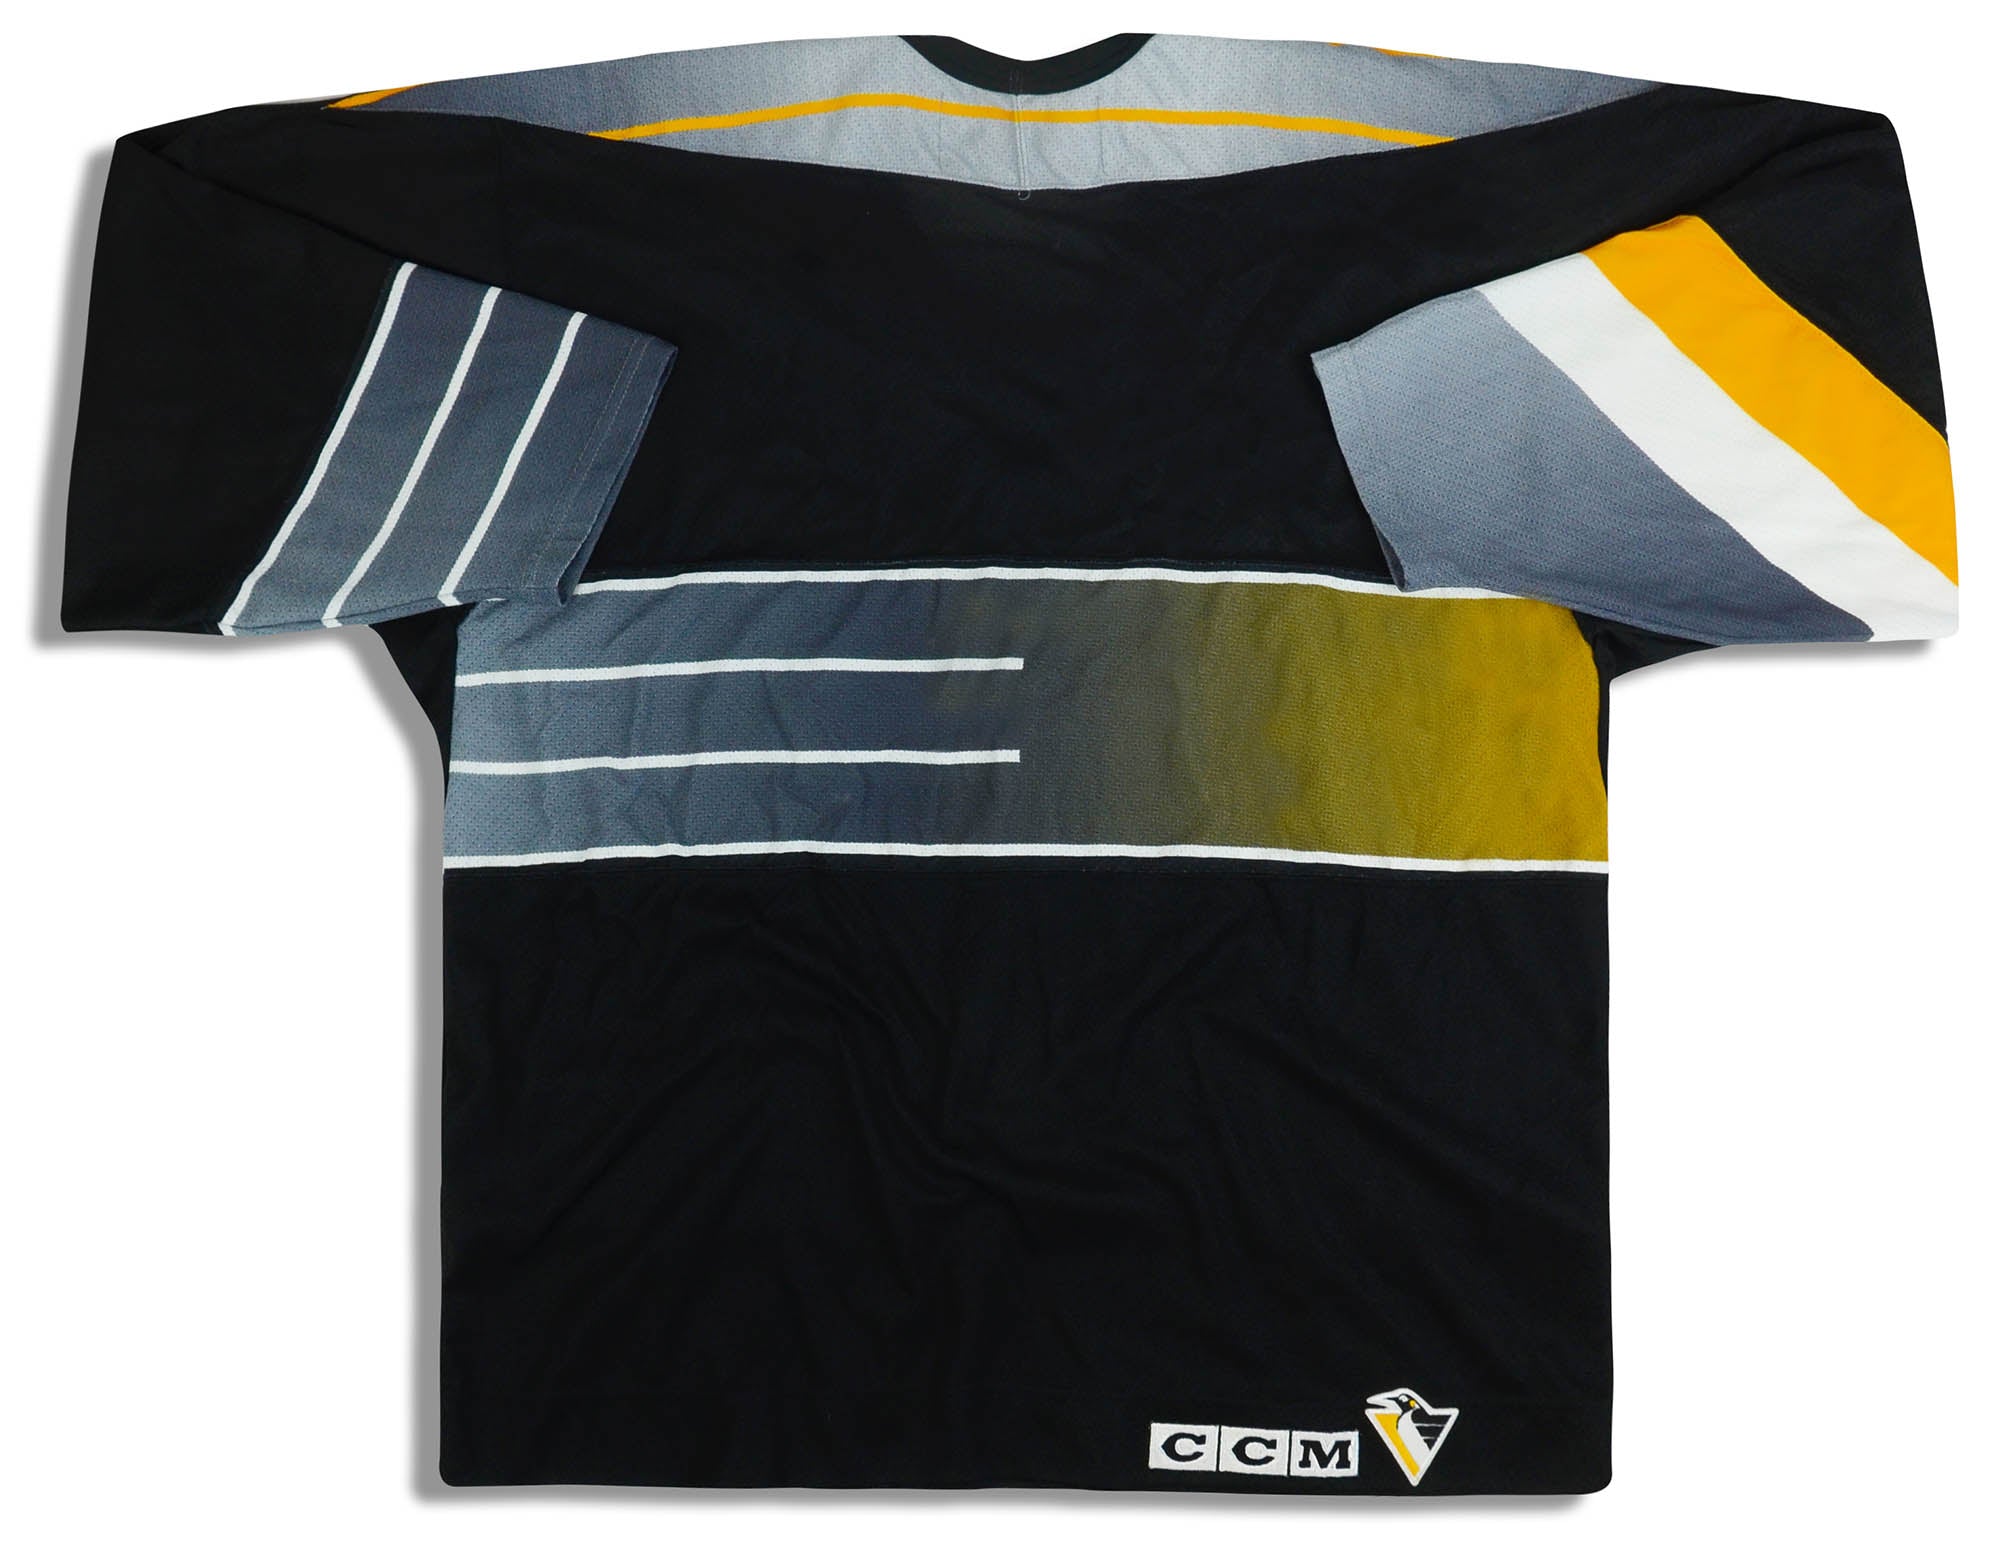 New Pittsburgh Penguins Alternate 3rd Jersey - 2013-14 or 2014-15